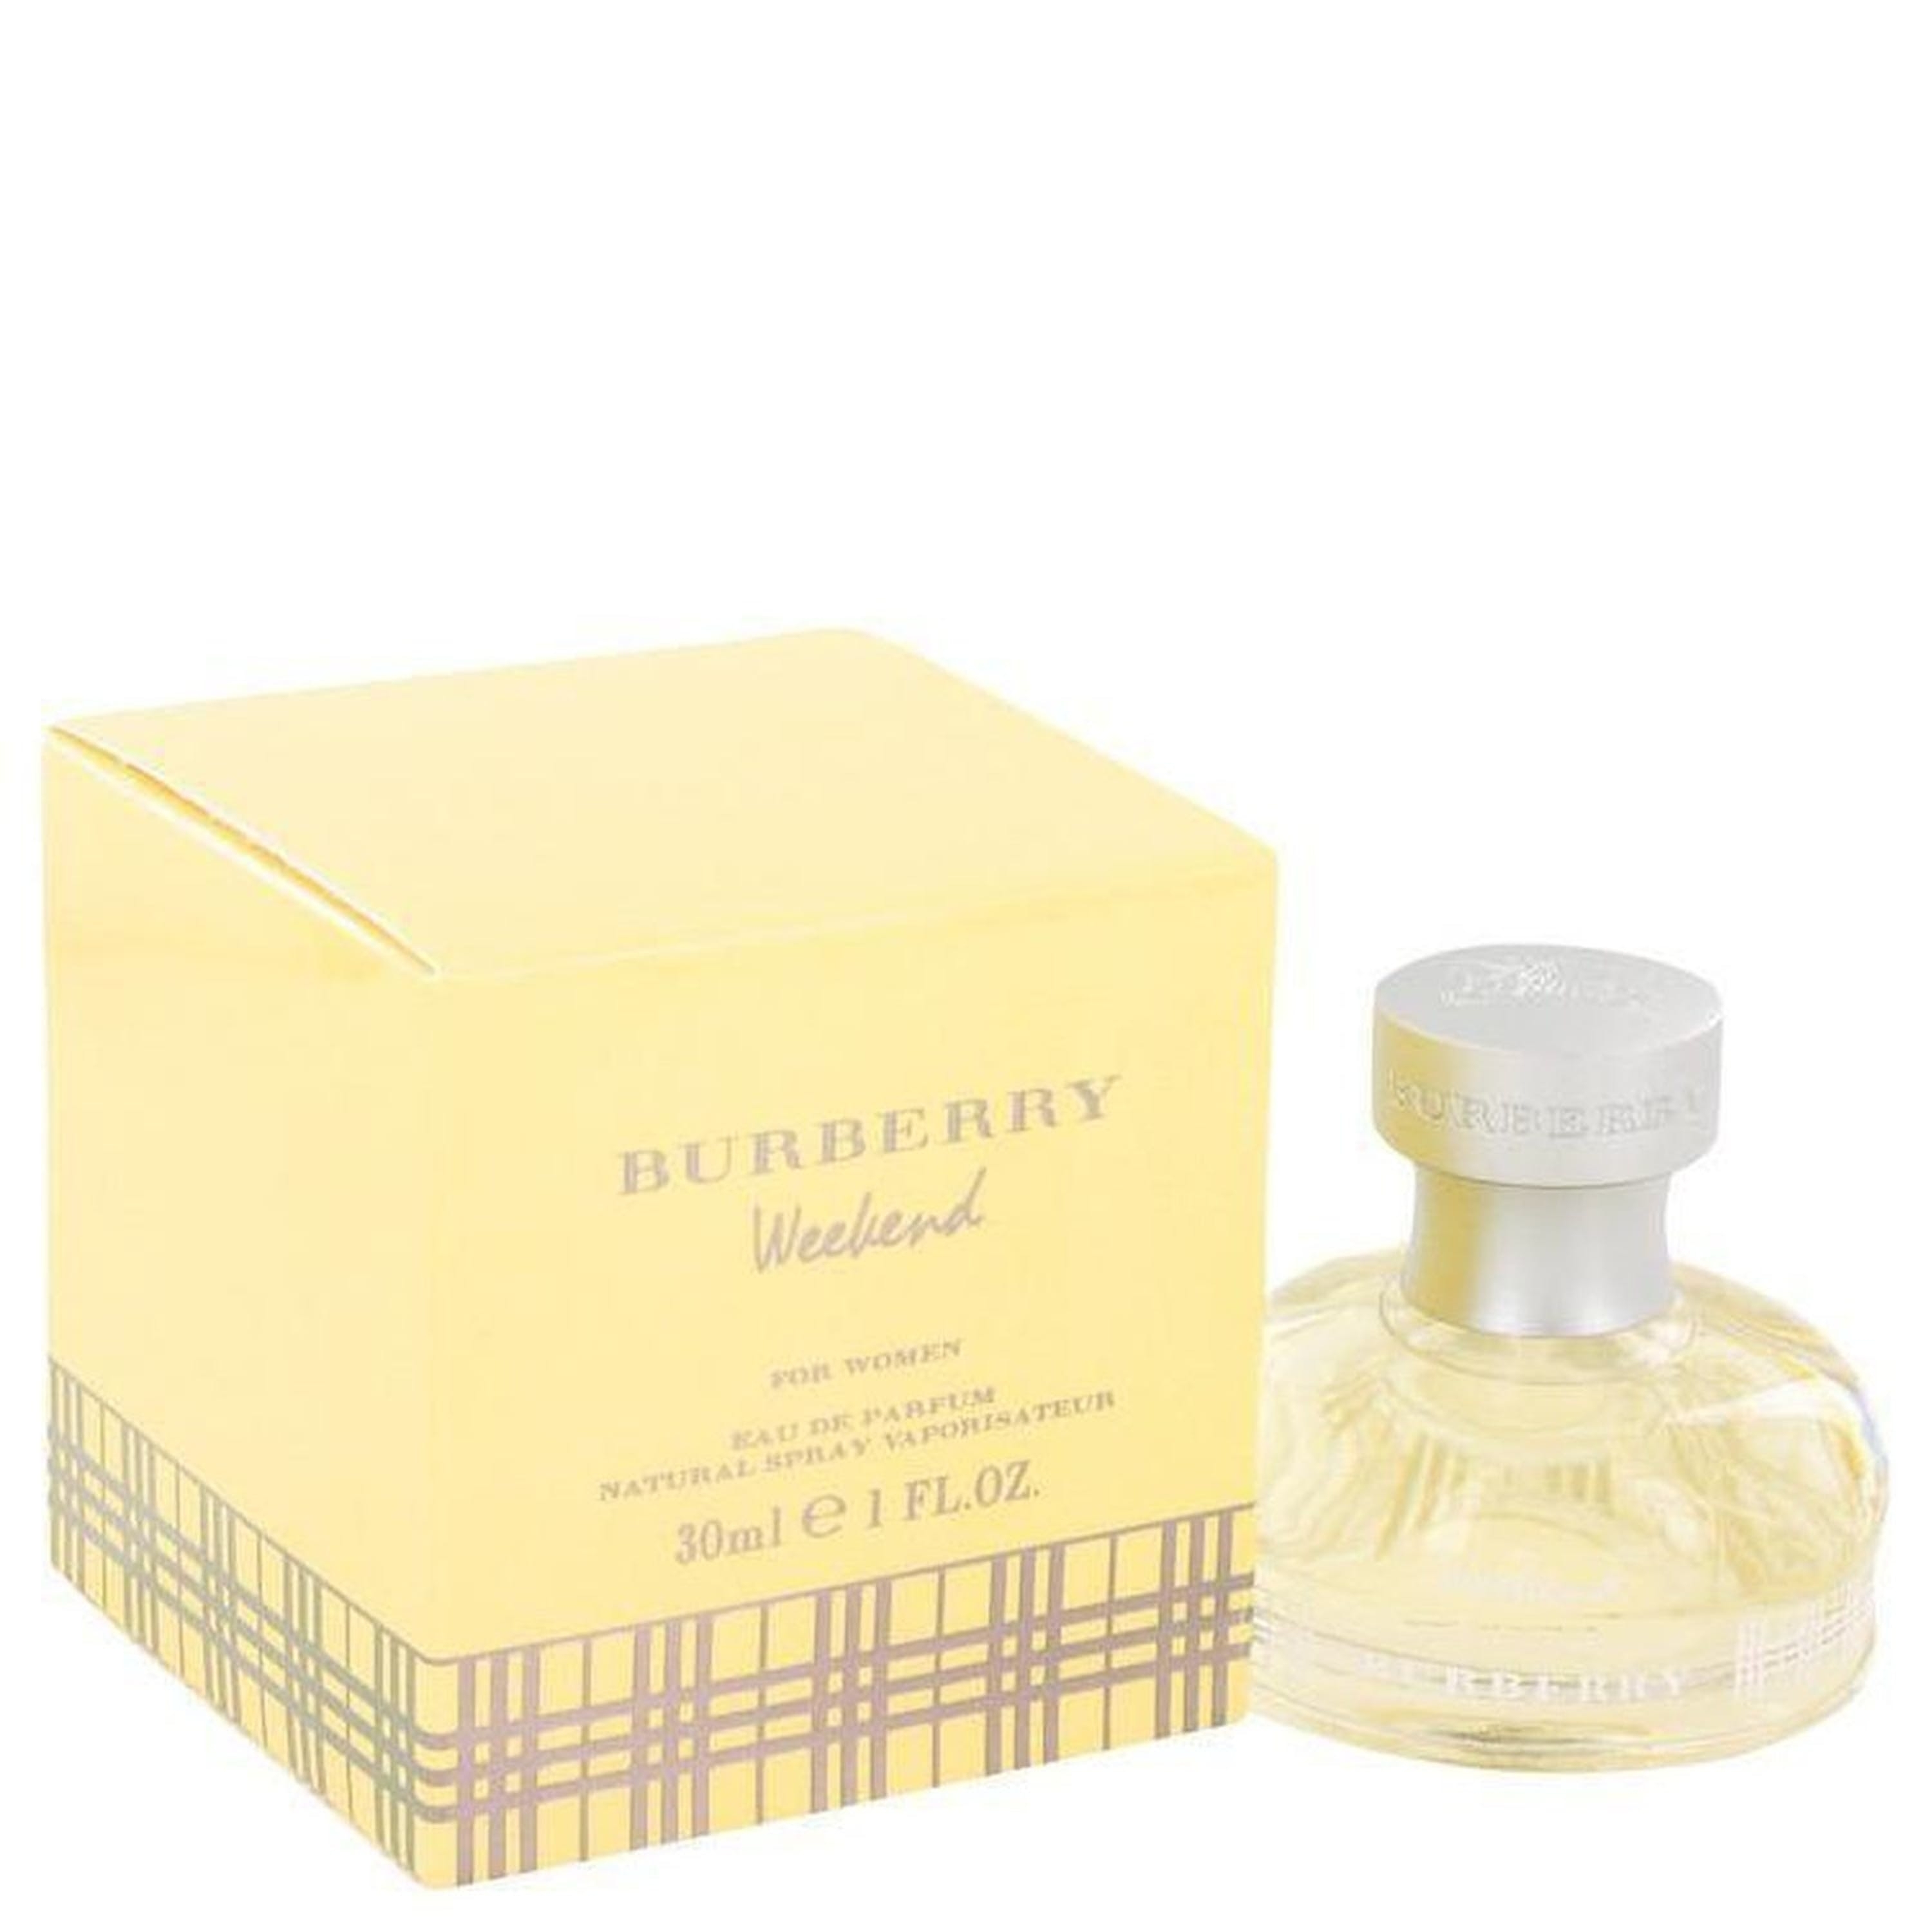 Weekend By Burberry EDP 1FL